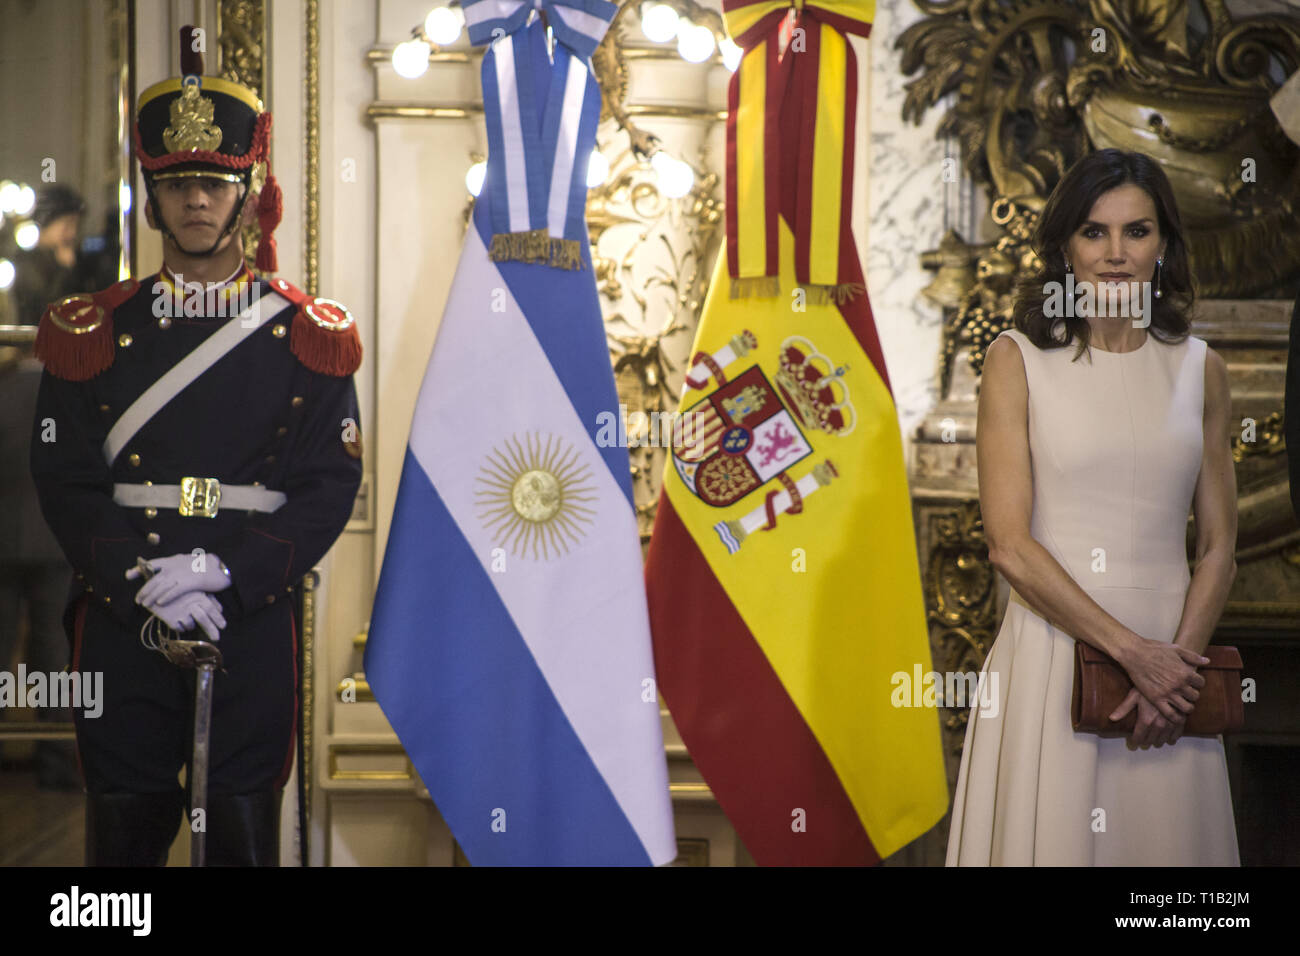 Buenos Aires, Federal Capital, Argentina. 25th Mar, 2019. The King and Queen of Spain, Felipe VI and Letizia Ortiz, arrived on the night of March 24, in Buenos Aires as part of the State visit to Argentina.As expected, the official activities of the monarchs began on Monday, March 25 with a bulky agenda of activities.In the morning, a meeting at the Casa Rosada with President Mauricio Macri and the First Lady, Juliana Awada.The kings arrived at the seat of government where they received honors with the military guard. After taking the official photo in the White Room, Macri and Felipe VI Stock Photo